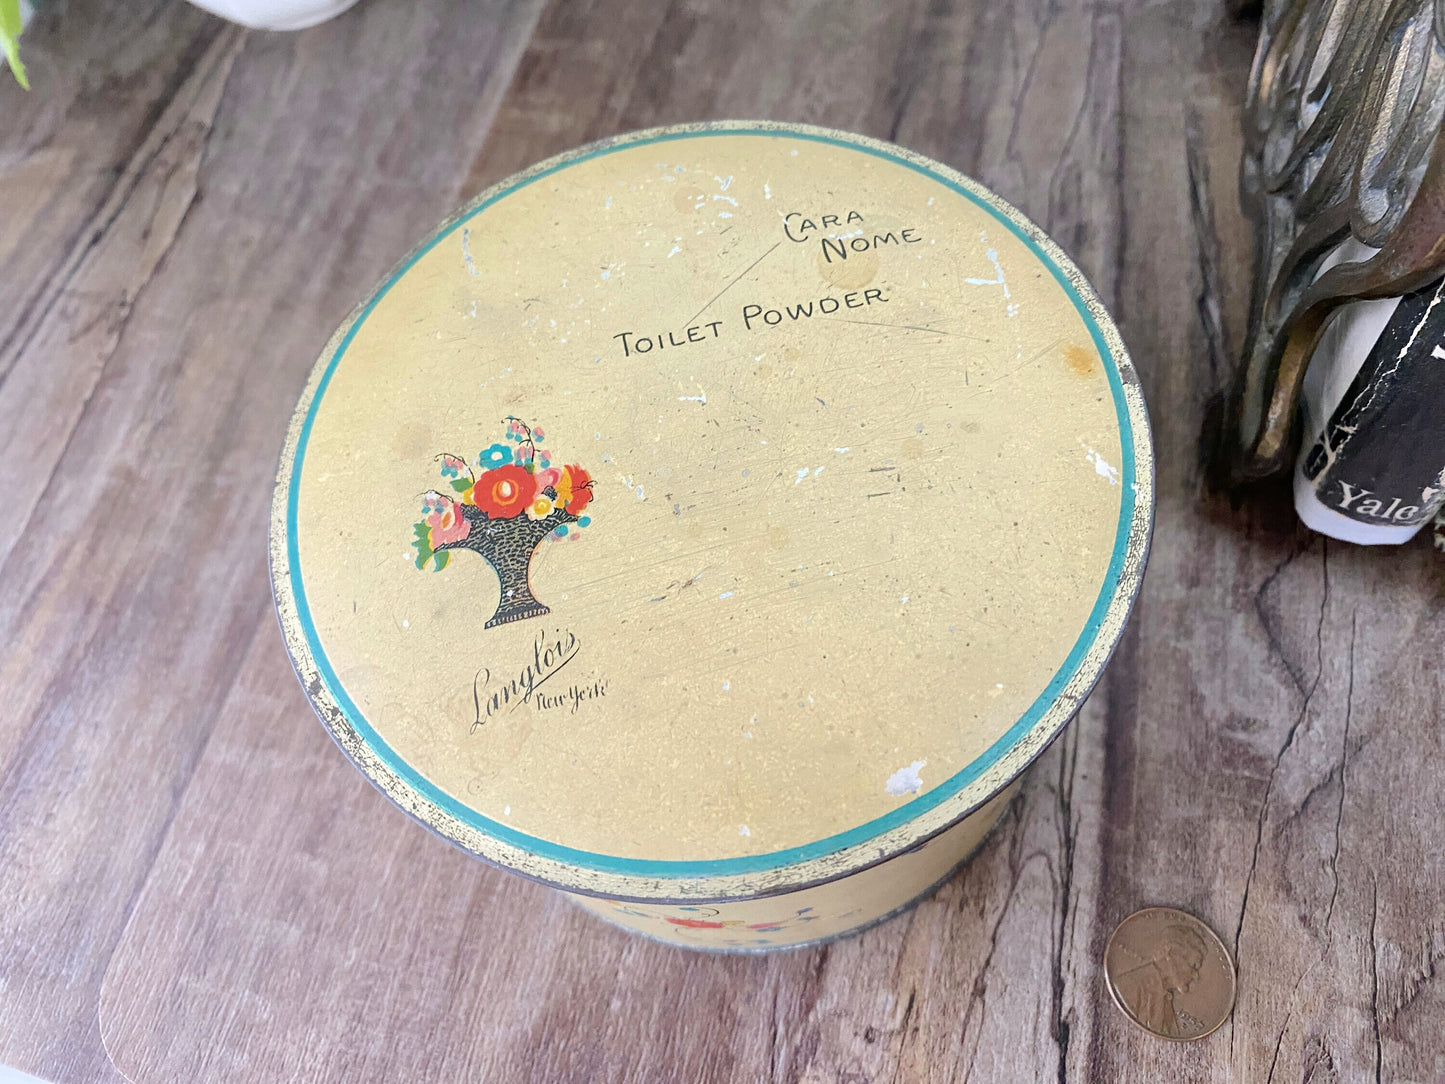 Vintage Dusting Powder TIn Cara Nome by Langlois New York